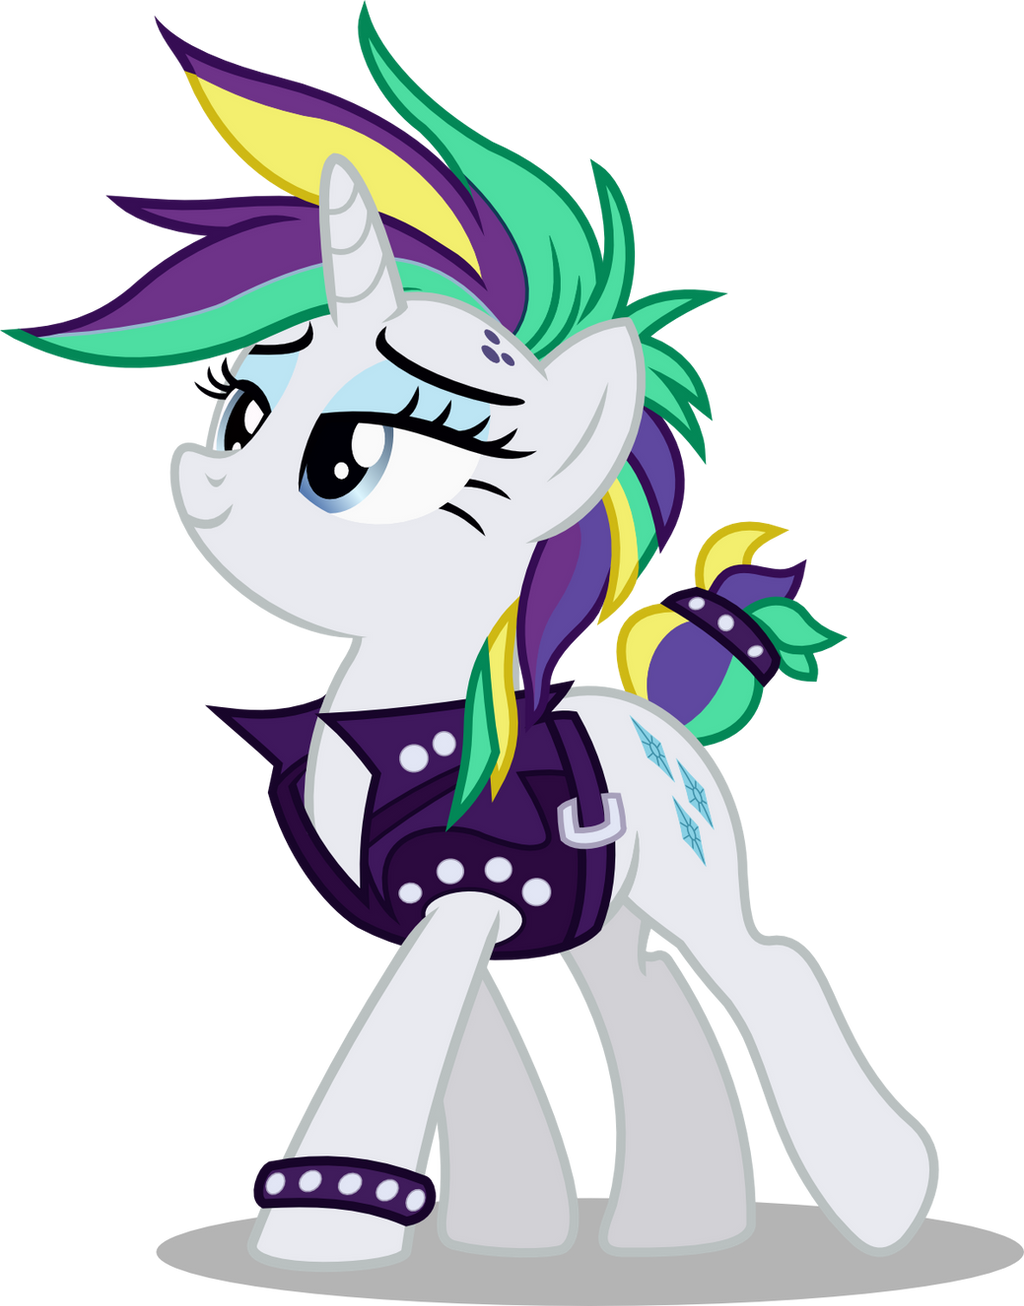 punk_rock_rarity_by_seahawk270-dbno1nw.png